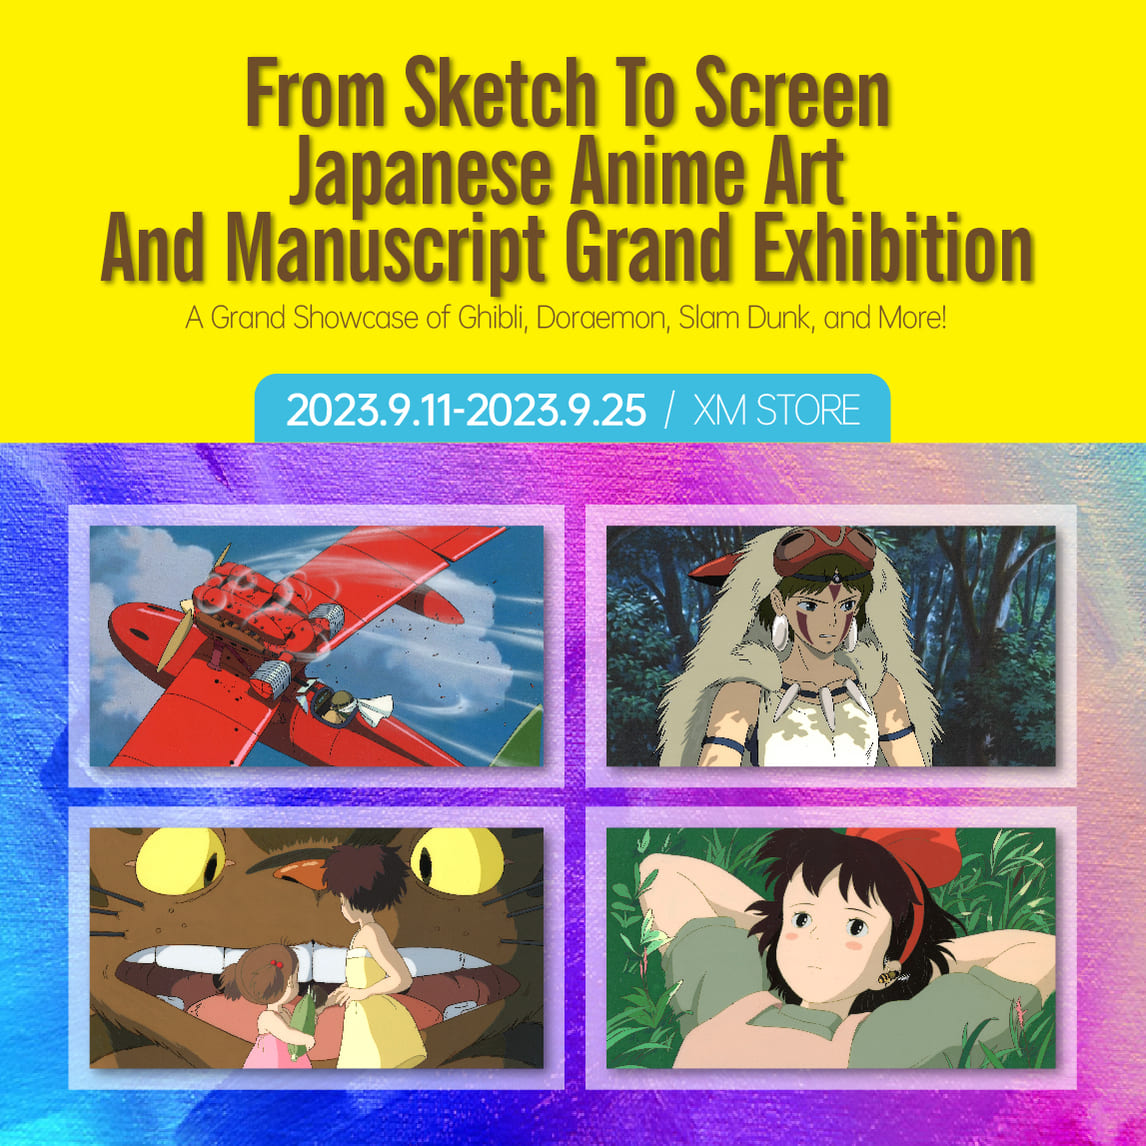 Visual of From Sketch to Screen: Japanese Anime Art, and Manuscript Grand Exhibition: A Grand Showcase of Ghibli, Doraemon, Slam Dunk, and More